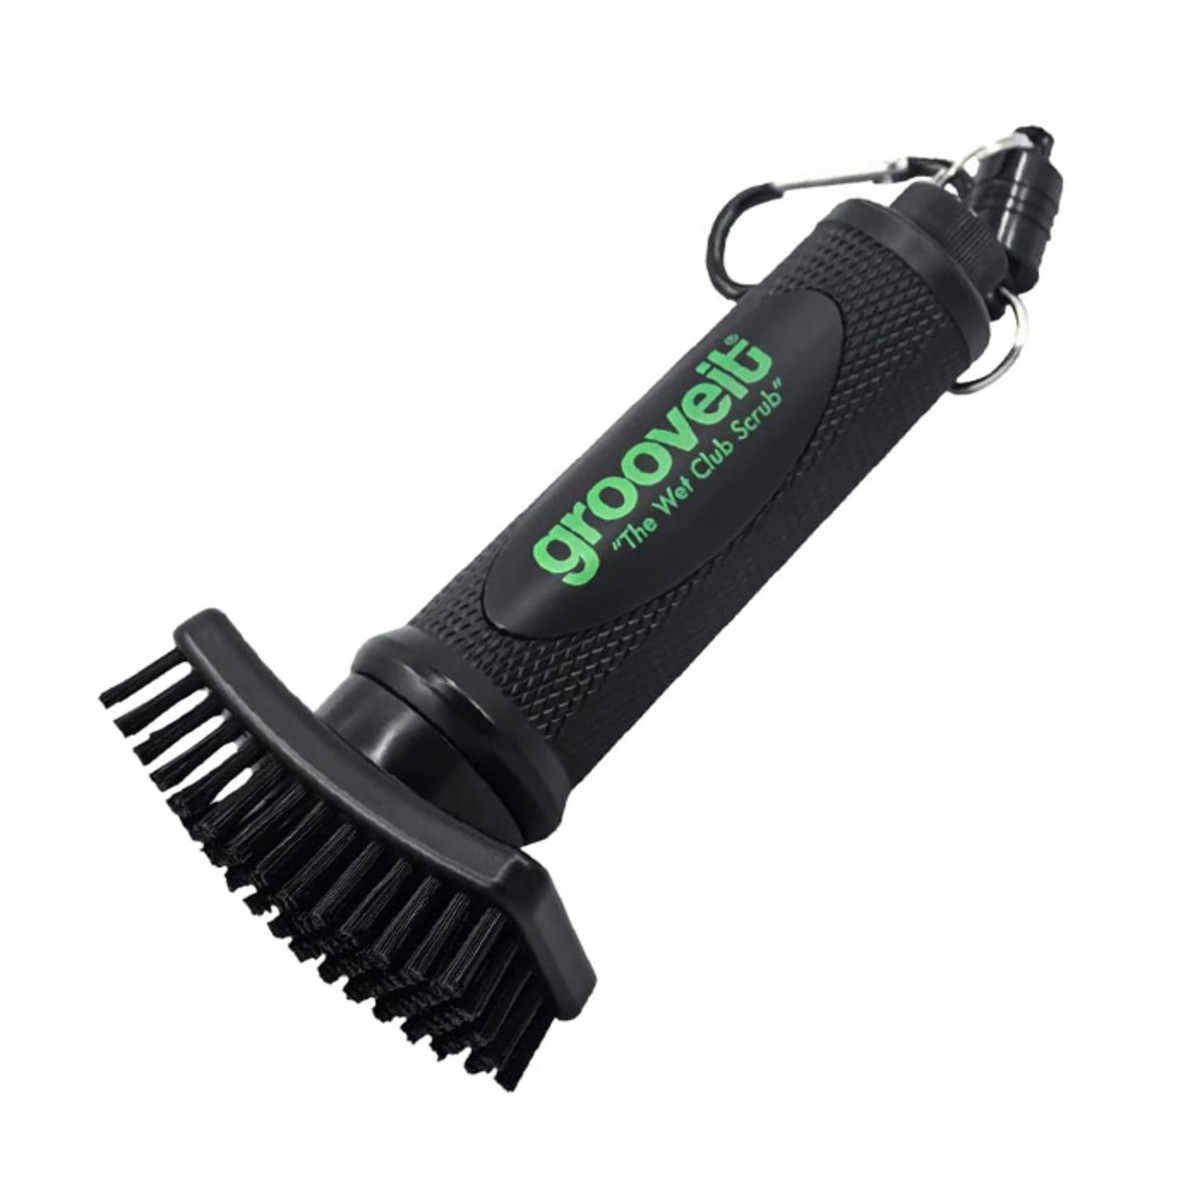 GrooveIt Golf Cleaning Brush